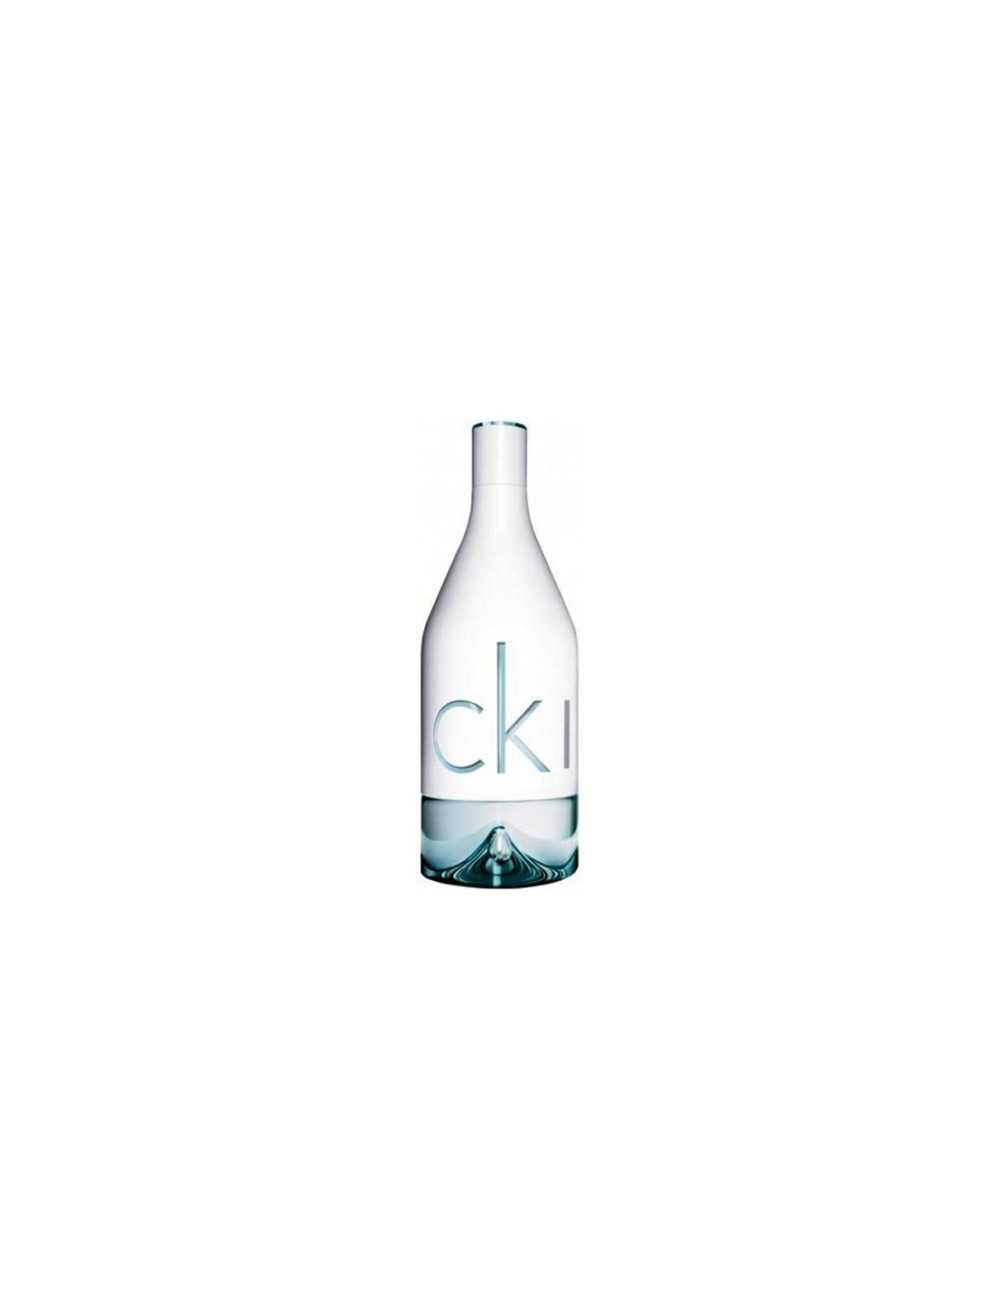 Ck In 2 you For Him EDT Calvin Klein - rosso.shop